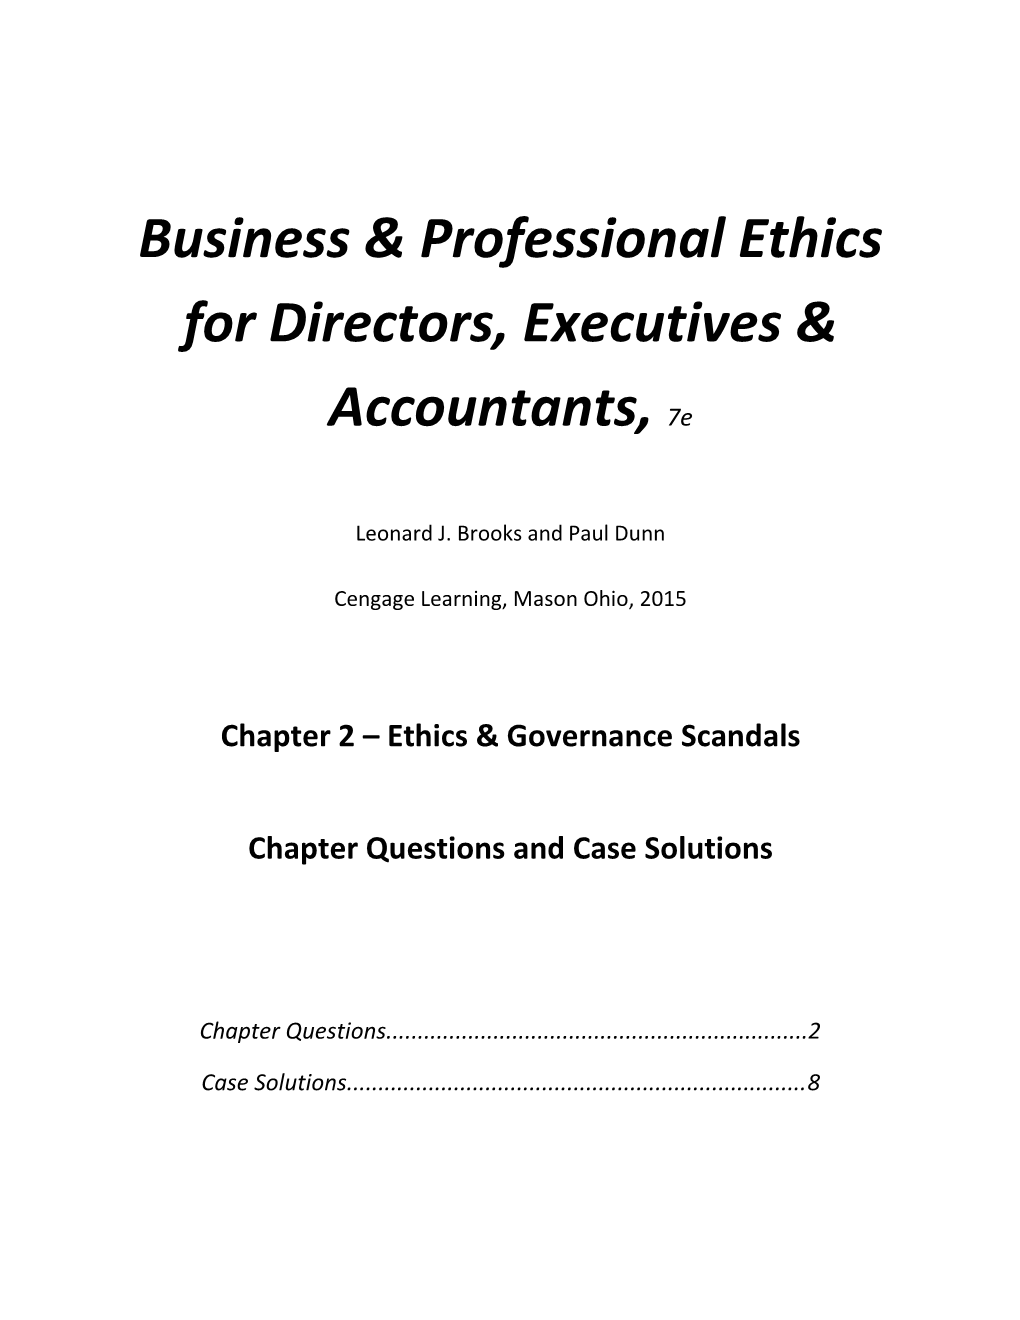 Business & Professional Ethics for Directors